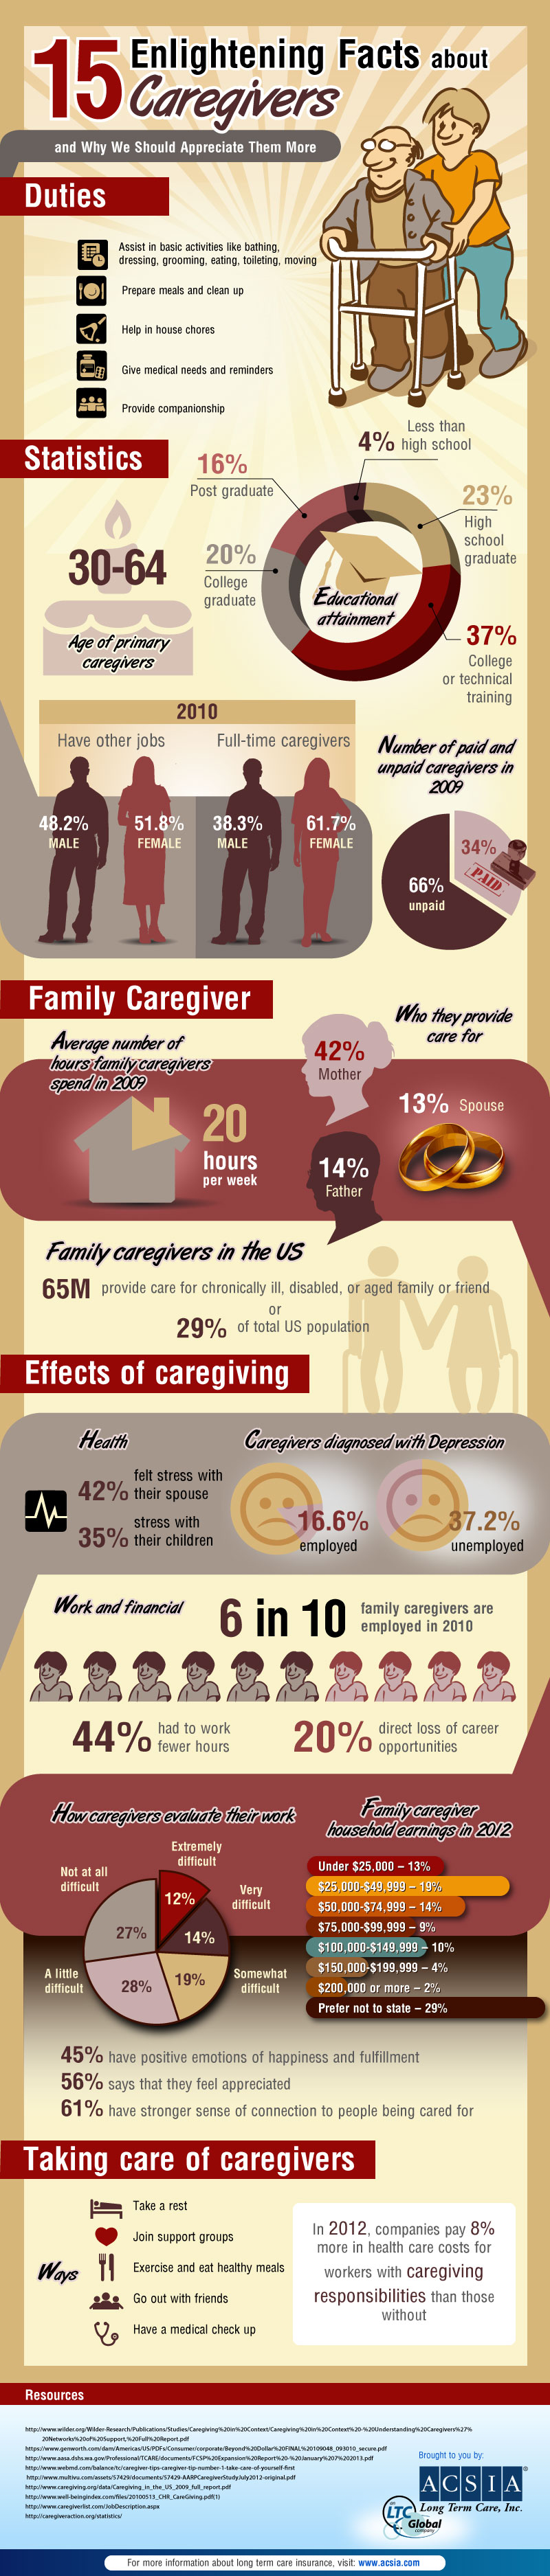 caring-for-the-caregiver-infographic